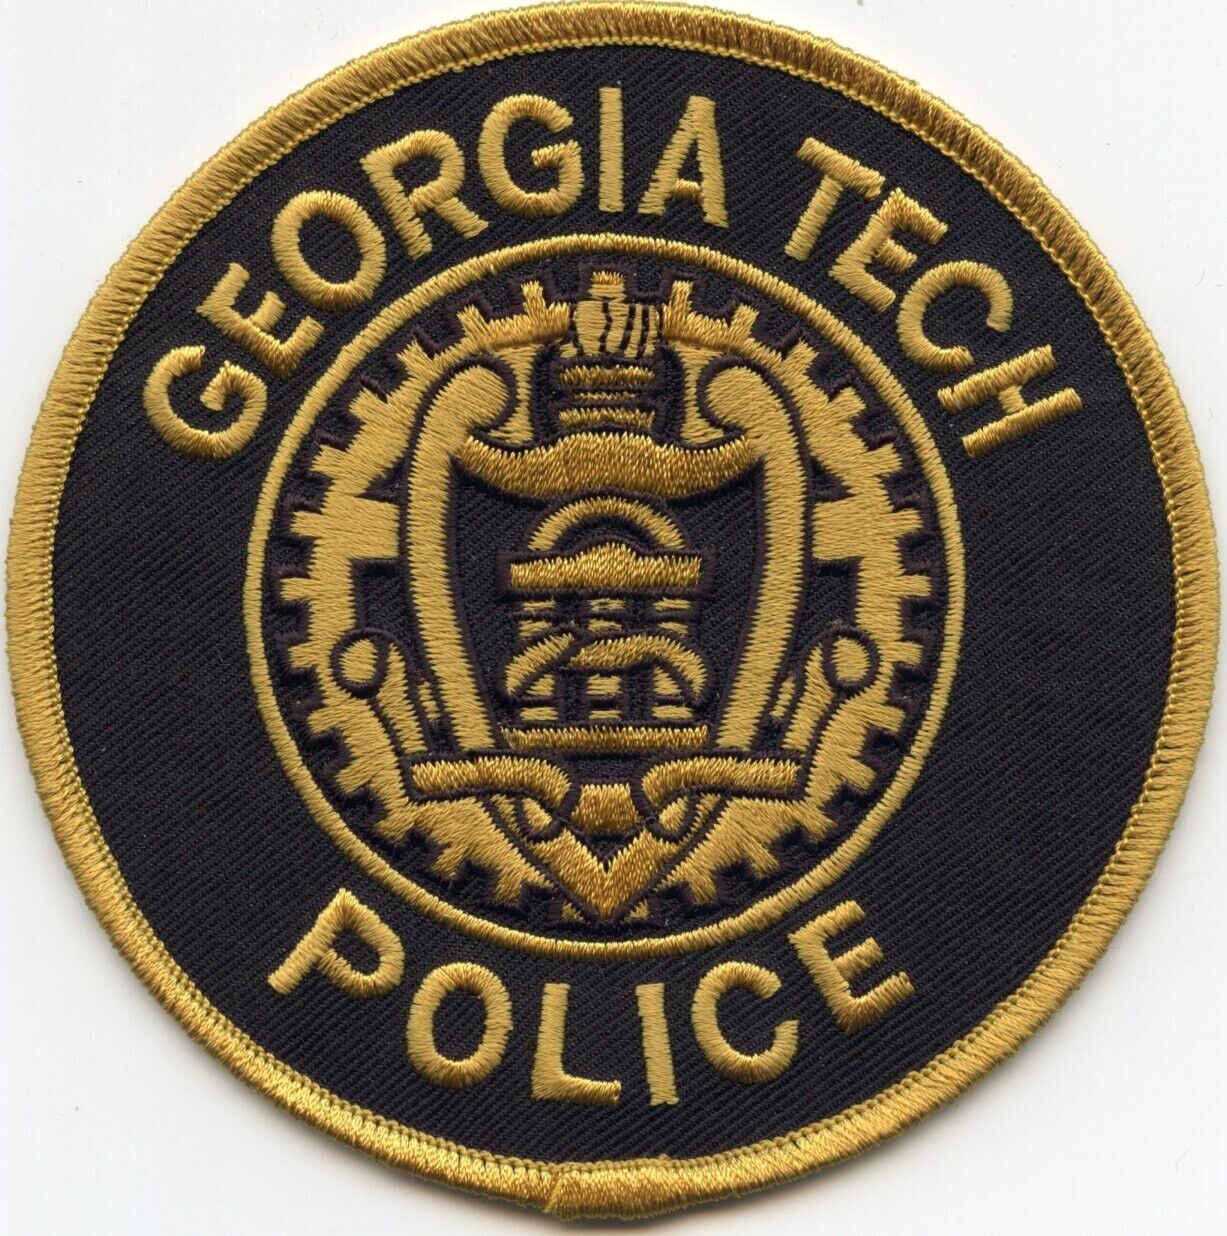 GEORGIA TECH UNIVERSITY gold and black CAMPUS POLICE PATCH